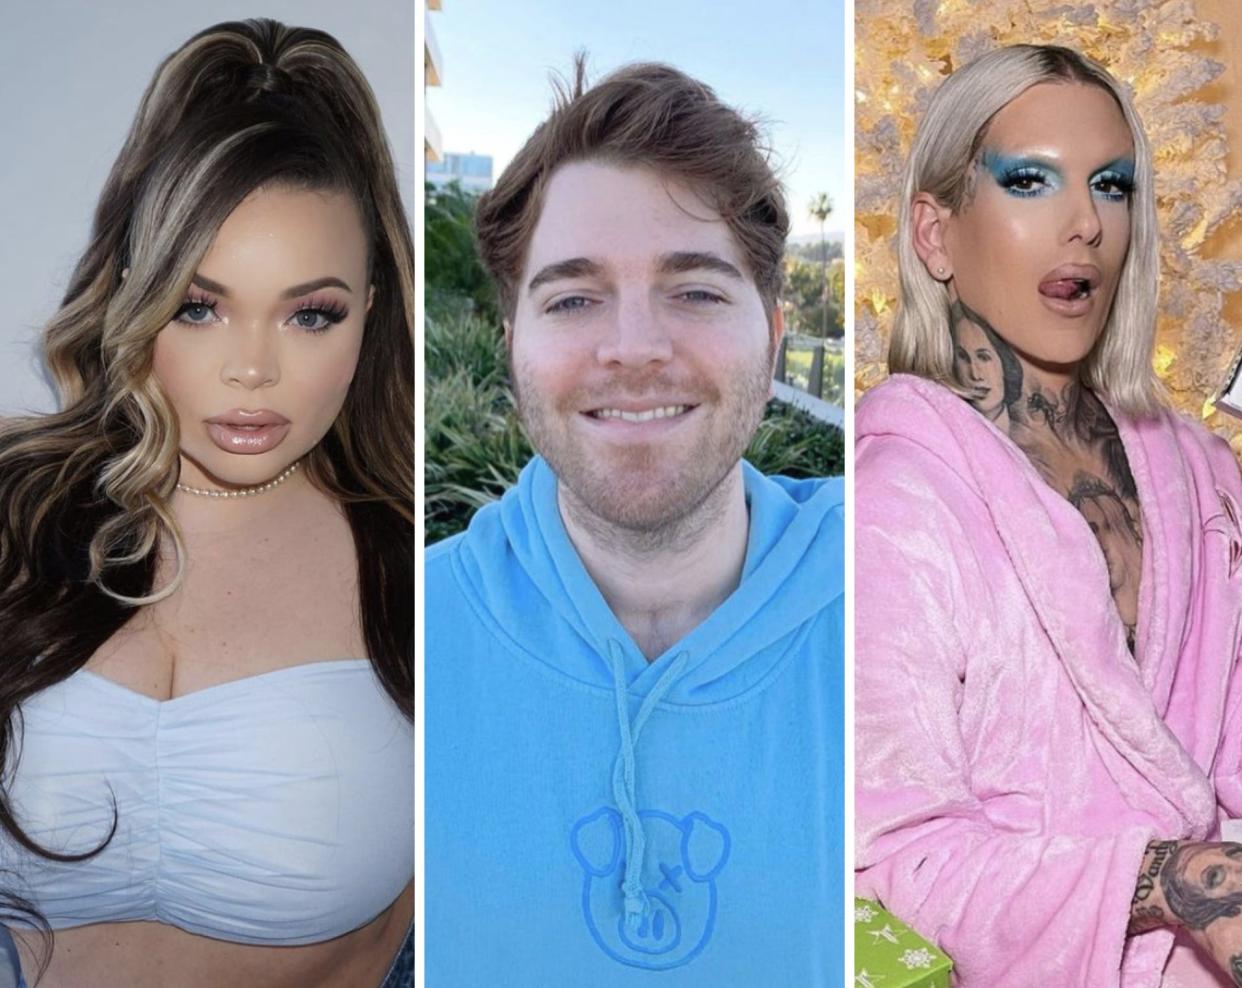 Trisha Paytas, Shane Dawson, and Jeffree Star used to be a YouTube power trio. Now, they've split down the middle.